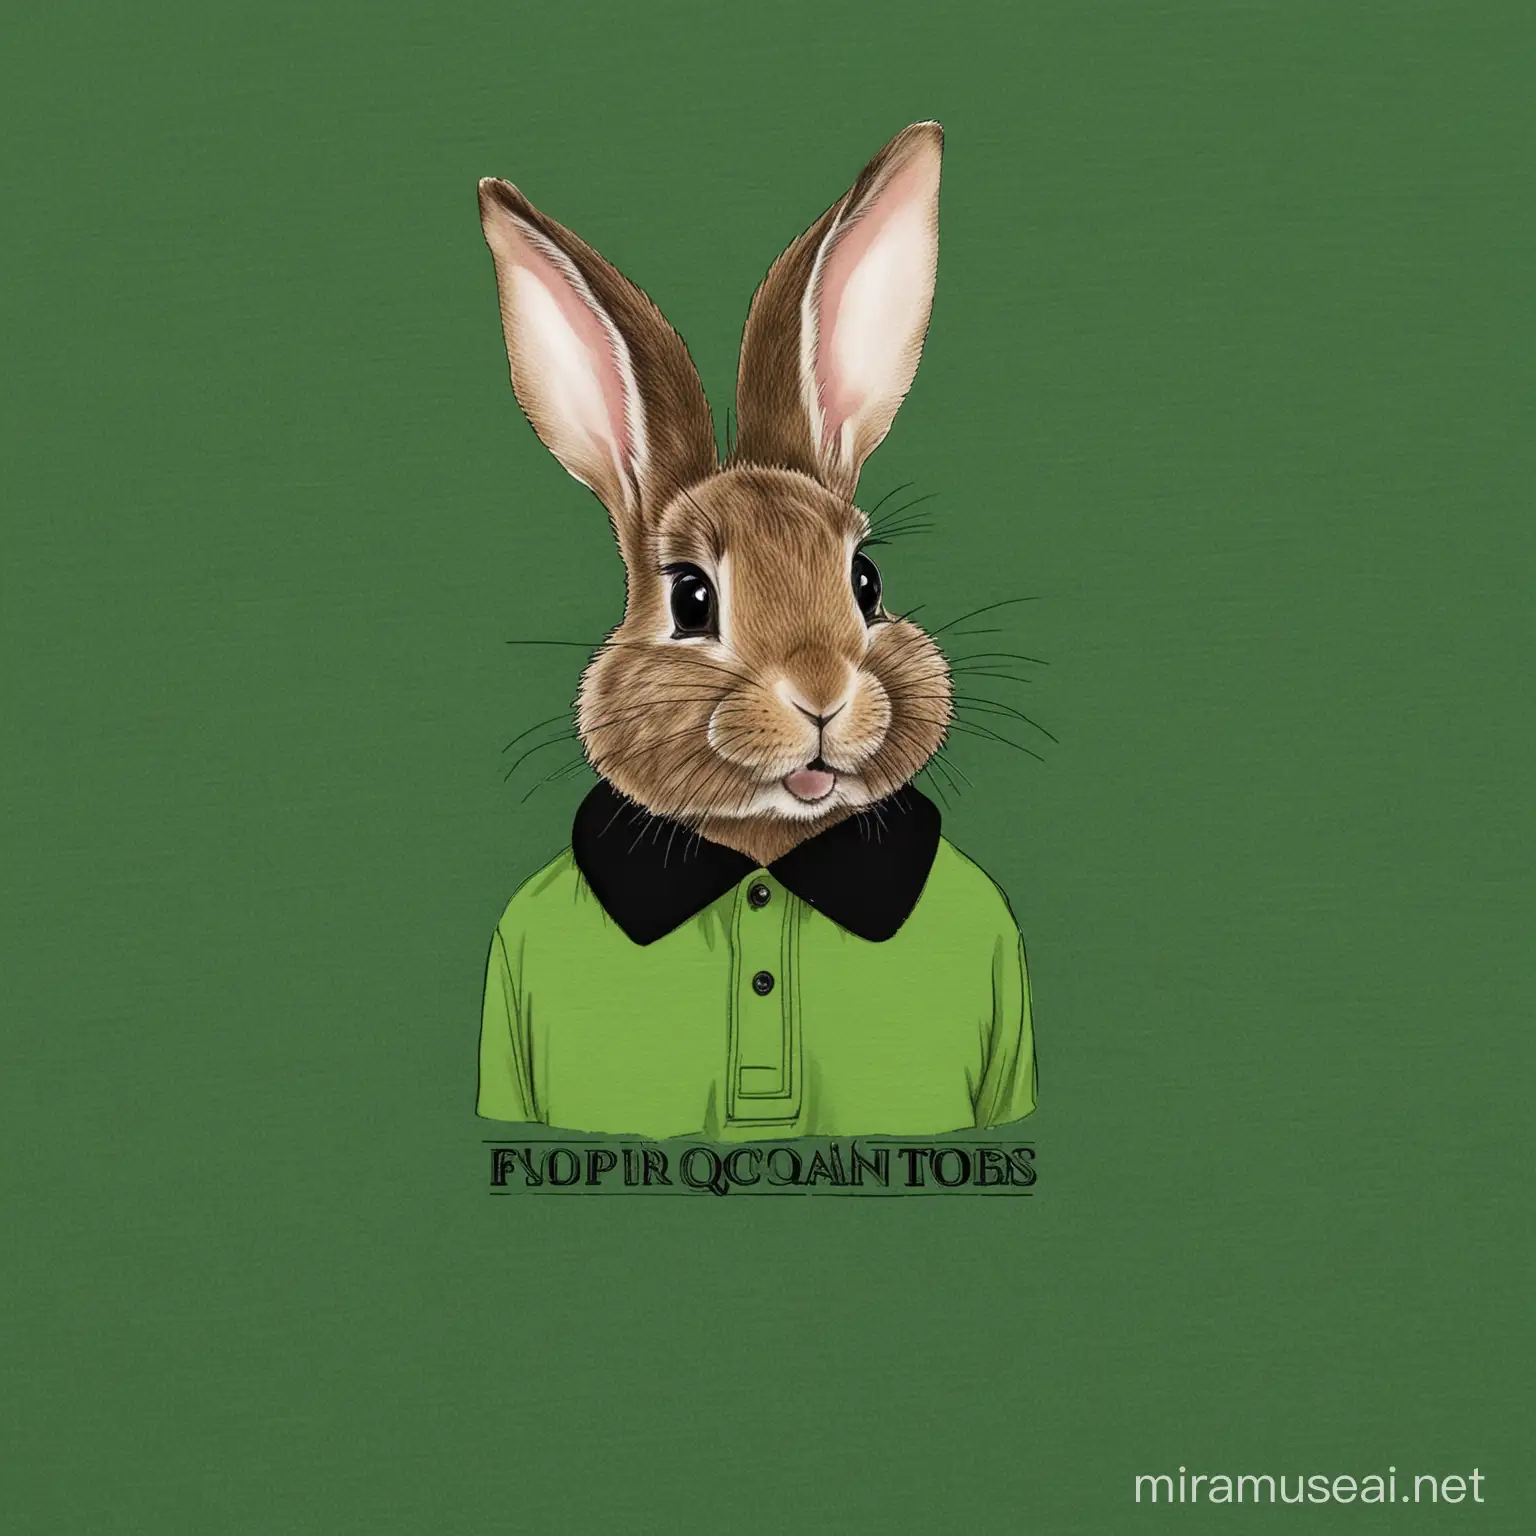 Easter Bunny Employees Wearing Green Polo Shirts with Black Collars